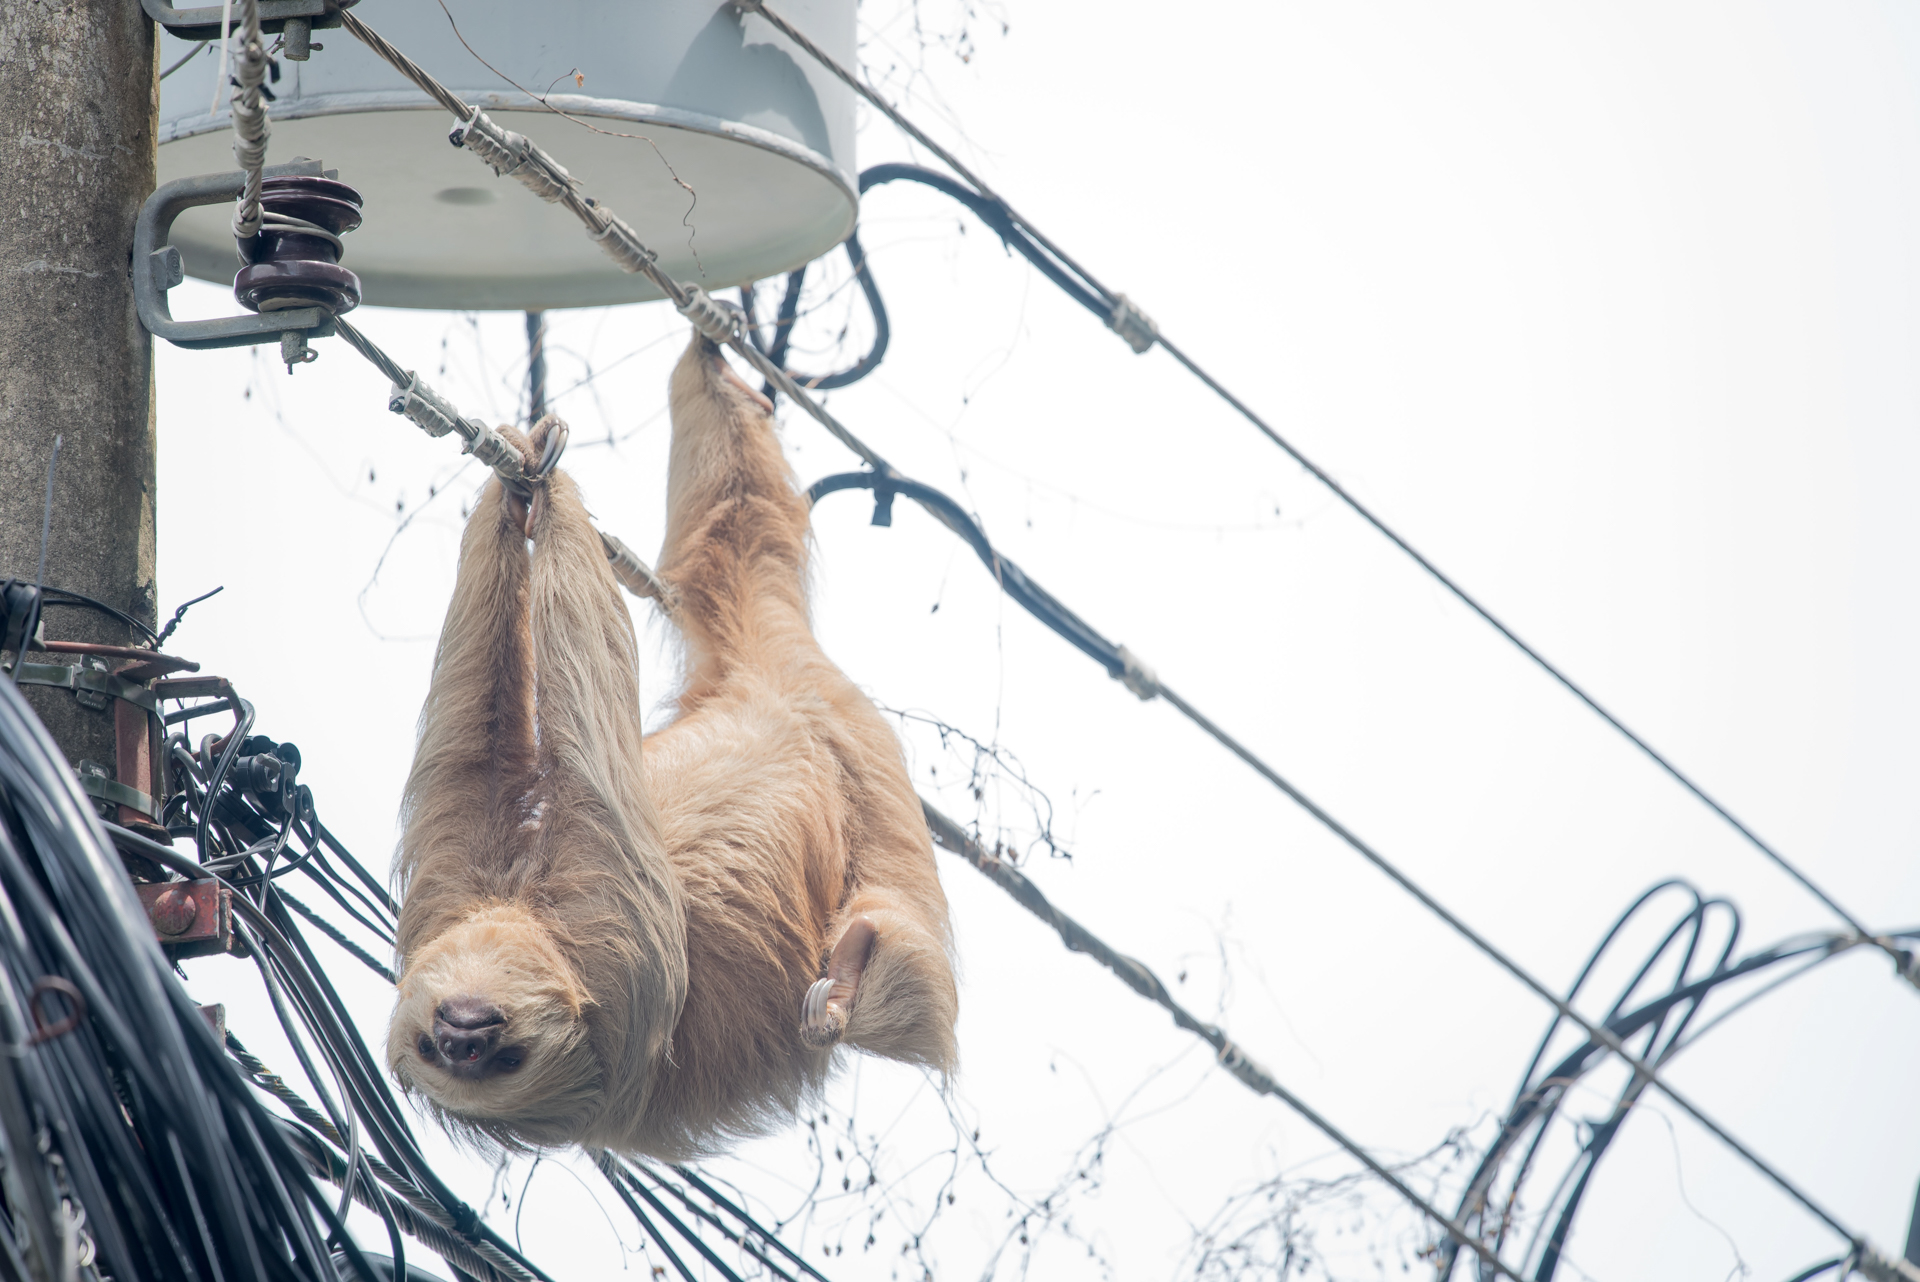 Dead sloth hanging from the electric wires